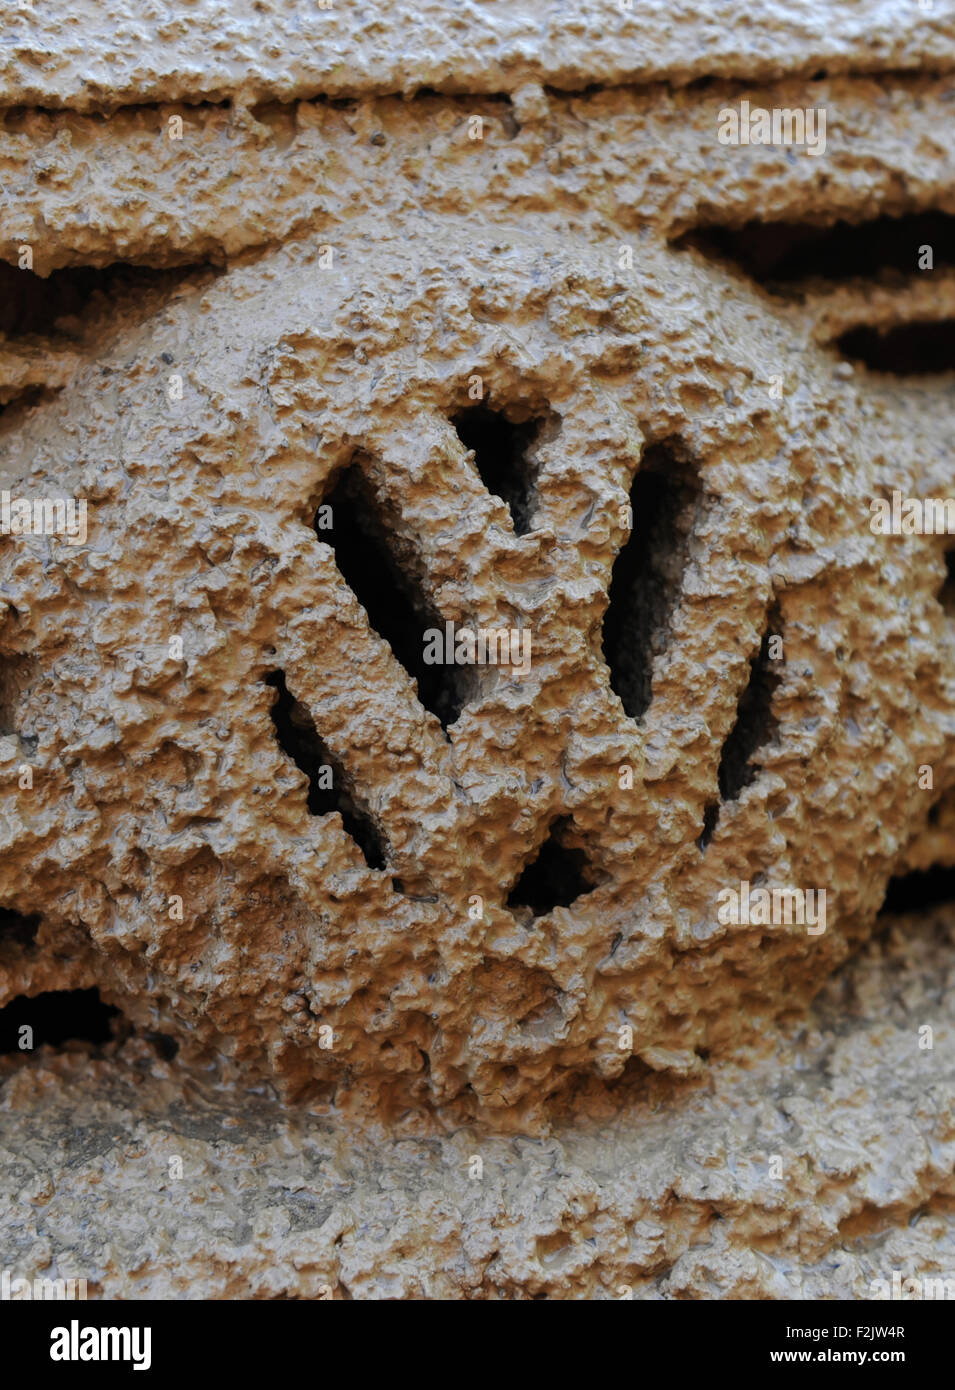 Kassel, Germany. 15th Dec, 2011. The emblem of a VW Tiguan is almost completely covered in mud at a construction site in Calden near Kassel, Germany, 15 December 2011. Weather in the coming days wil be dominated by rains and storms. Photo: Uwe Zucchi/dpa/Alamy Live News Stock Photo